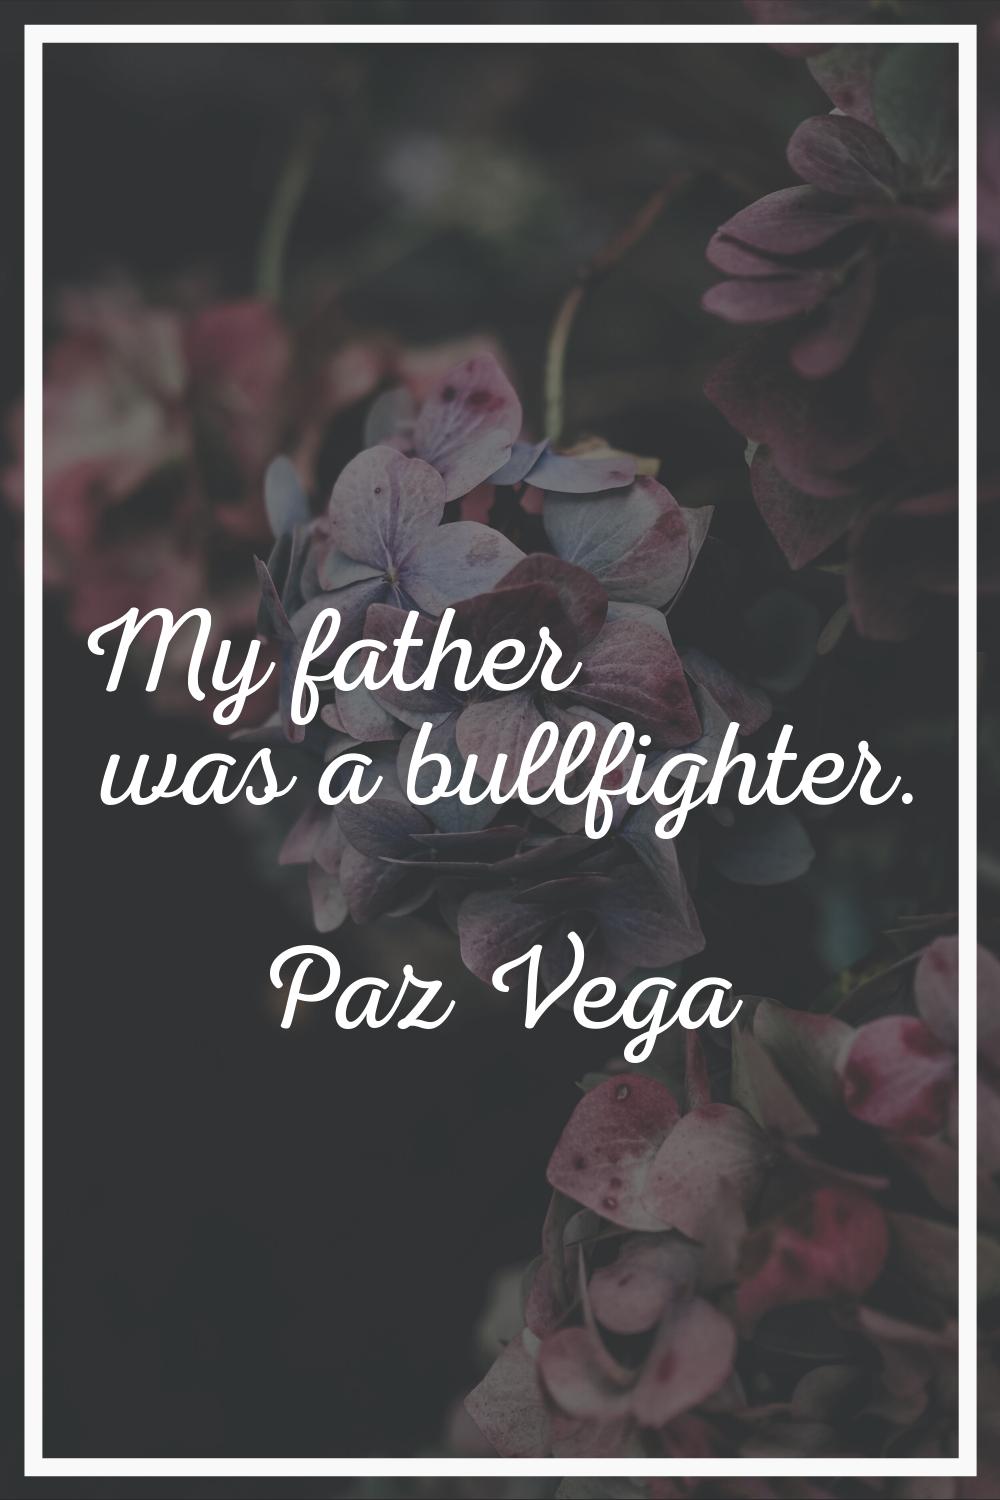 My father was a bullfighter.